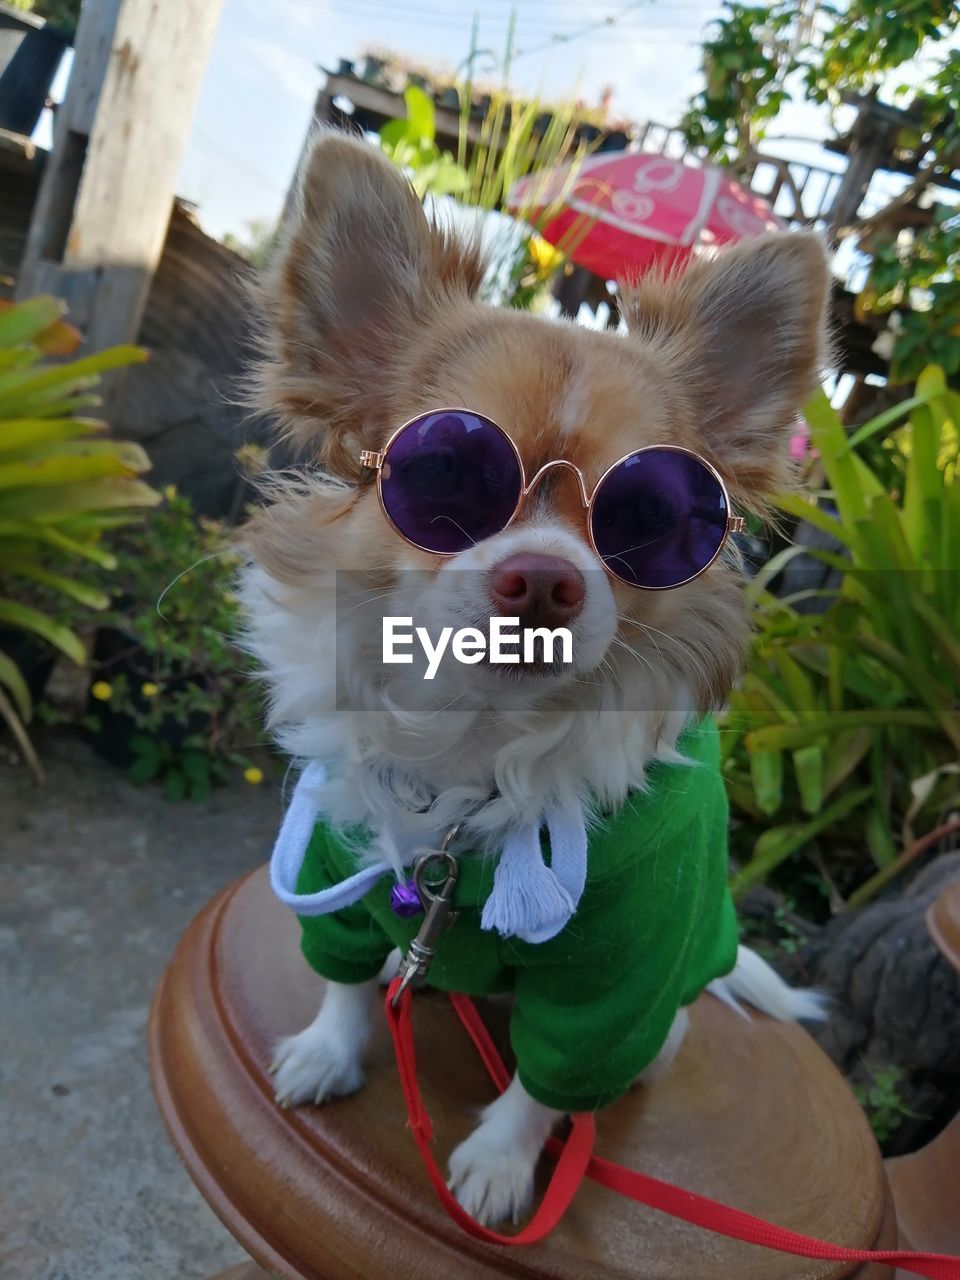 PORTRAIT OF A DOG WITH SUNGLASSES